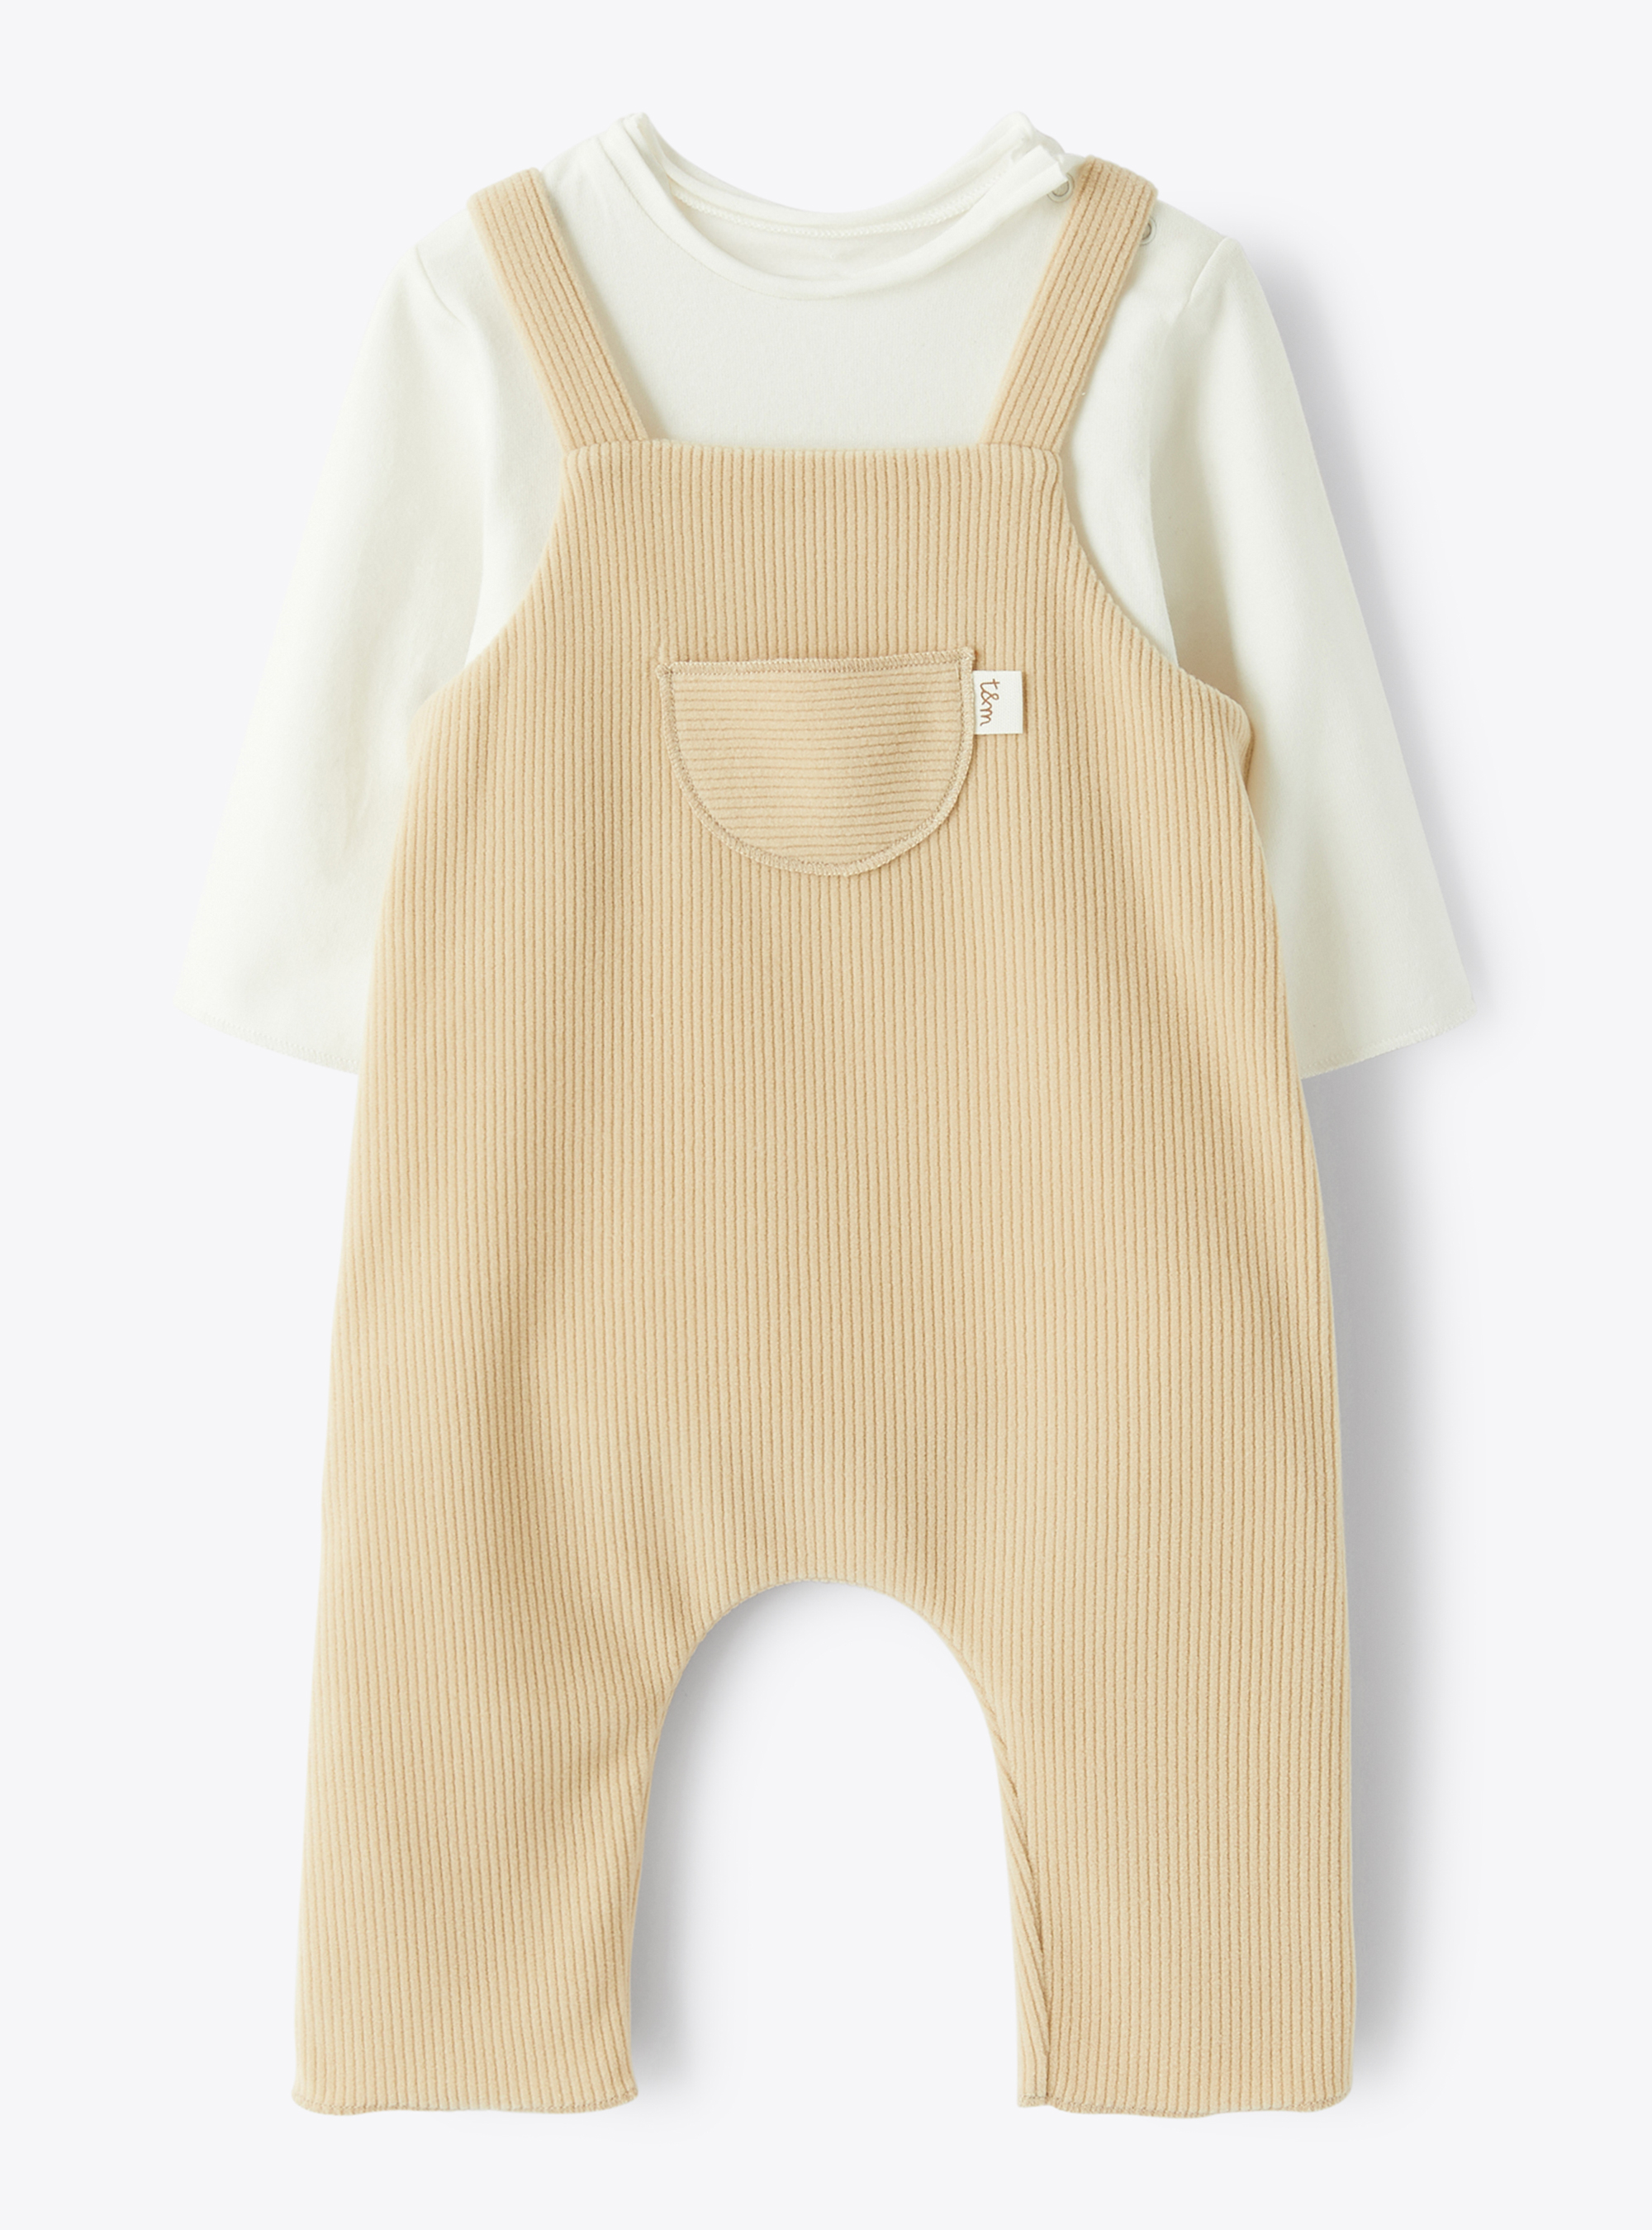 Two-piece dungaree set - Two-piece sets - Il Gufo